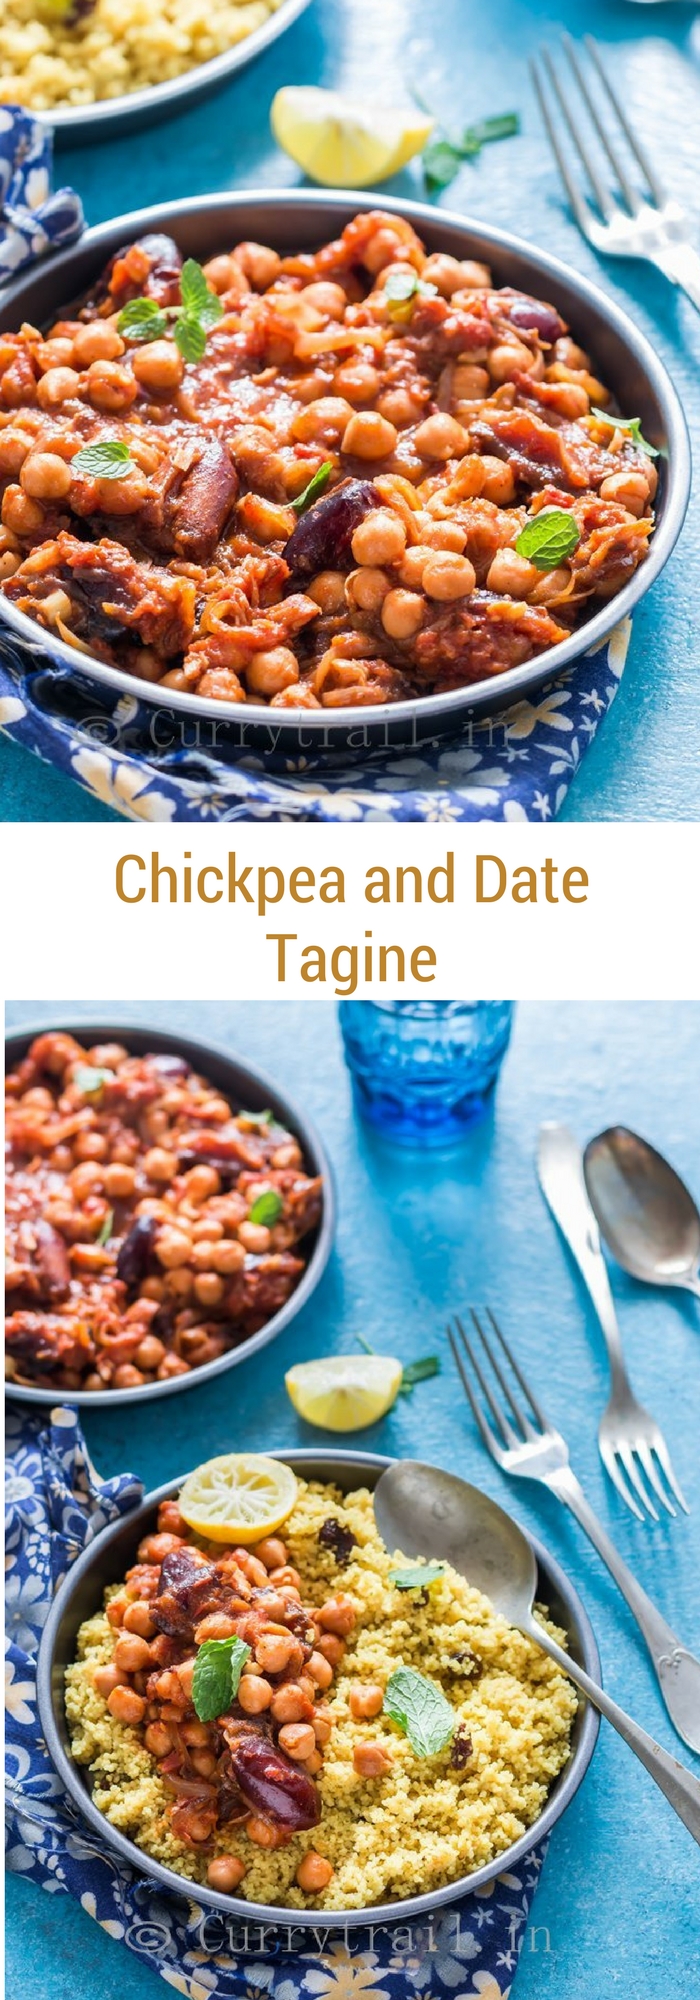 Chickpea and date tagine